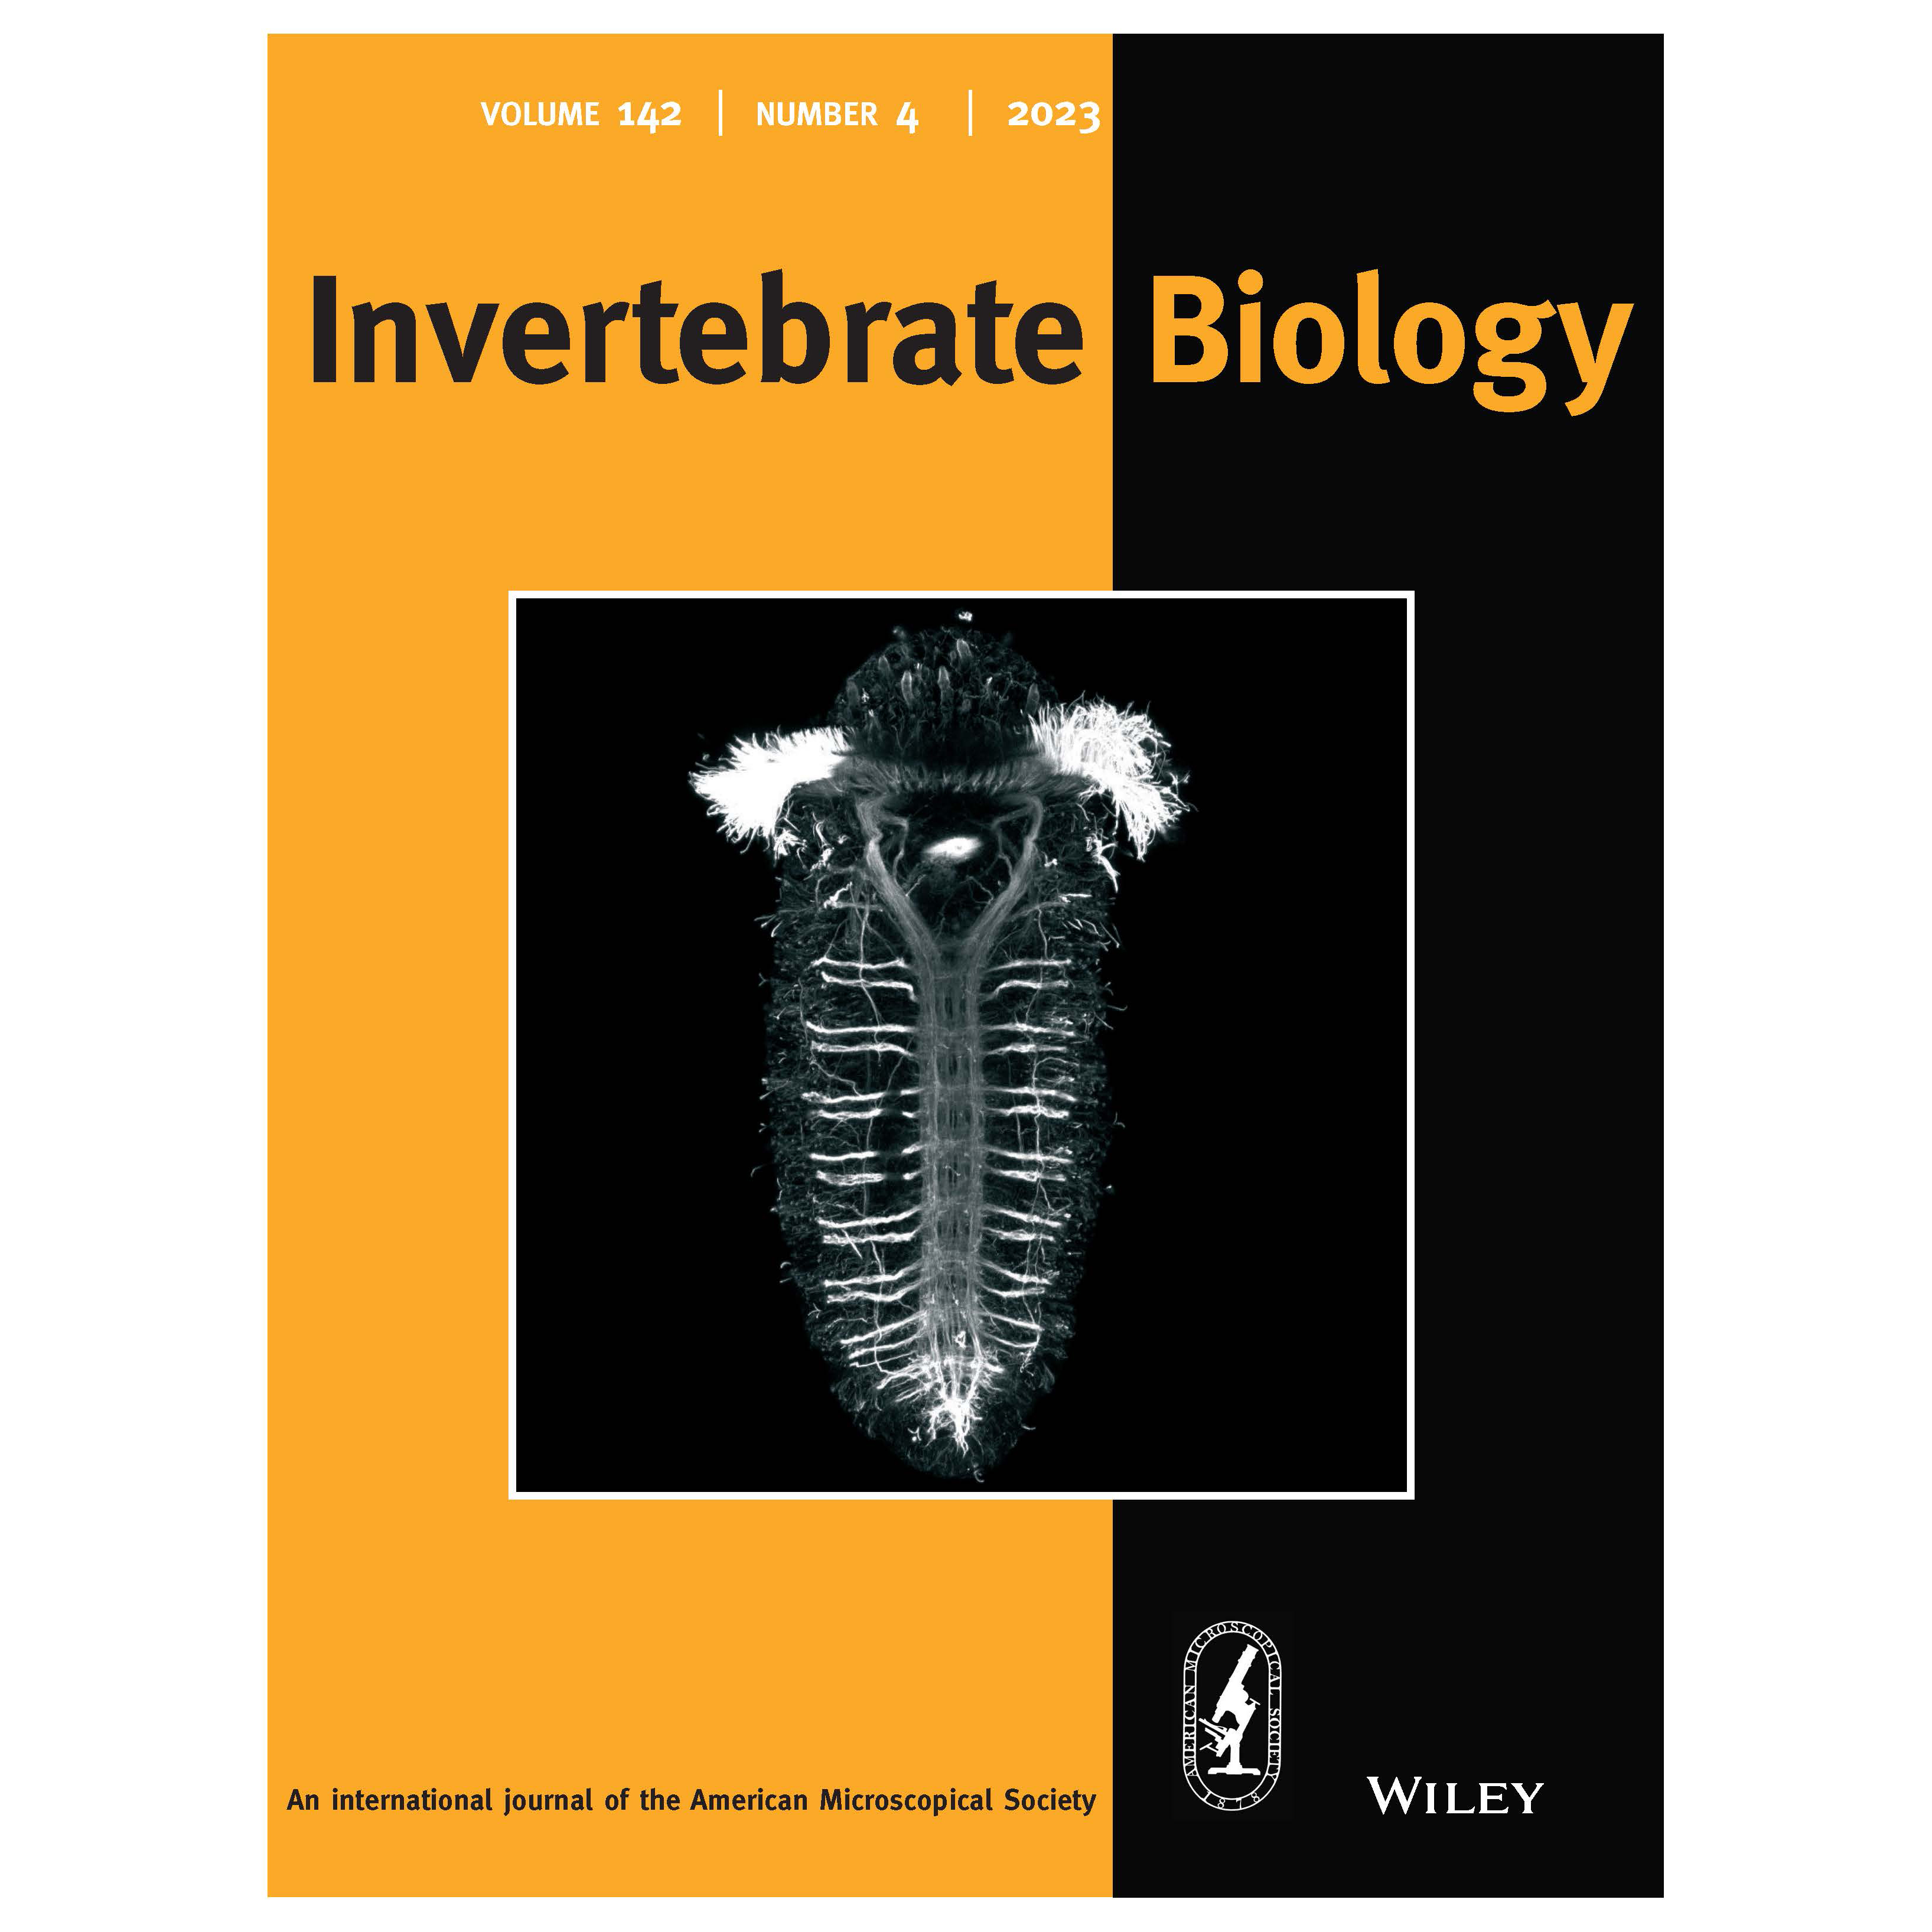 Fluorescent micrograph by Alicia Boyd selected for the cover of Invertebrate Biology (December 2023 issue)